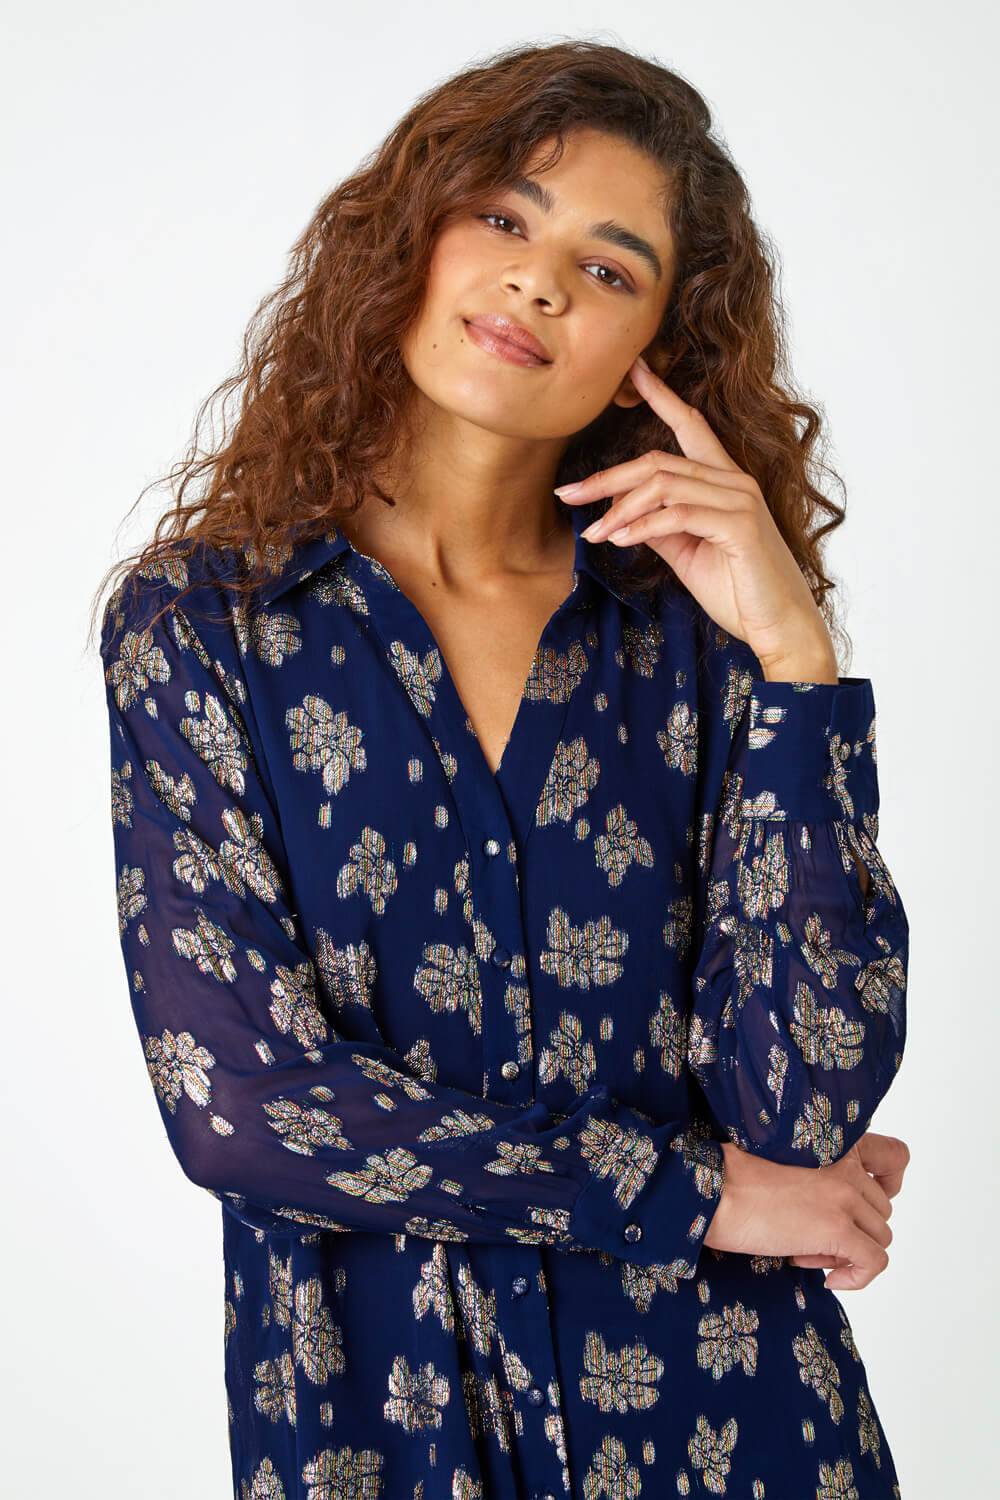 Midnight Blue Metallic Floral Print Blouse, Image 5 of 5